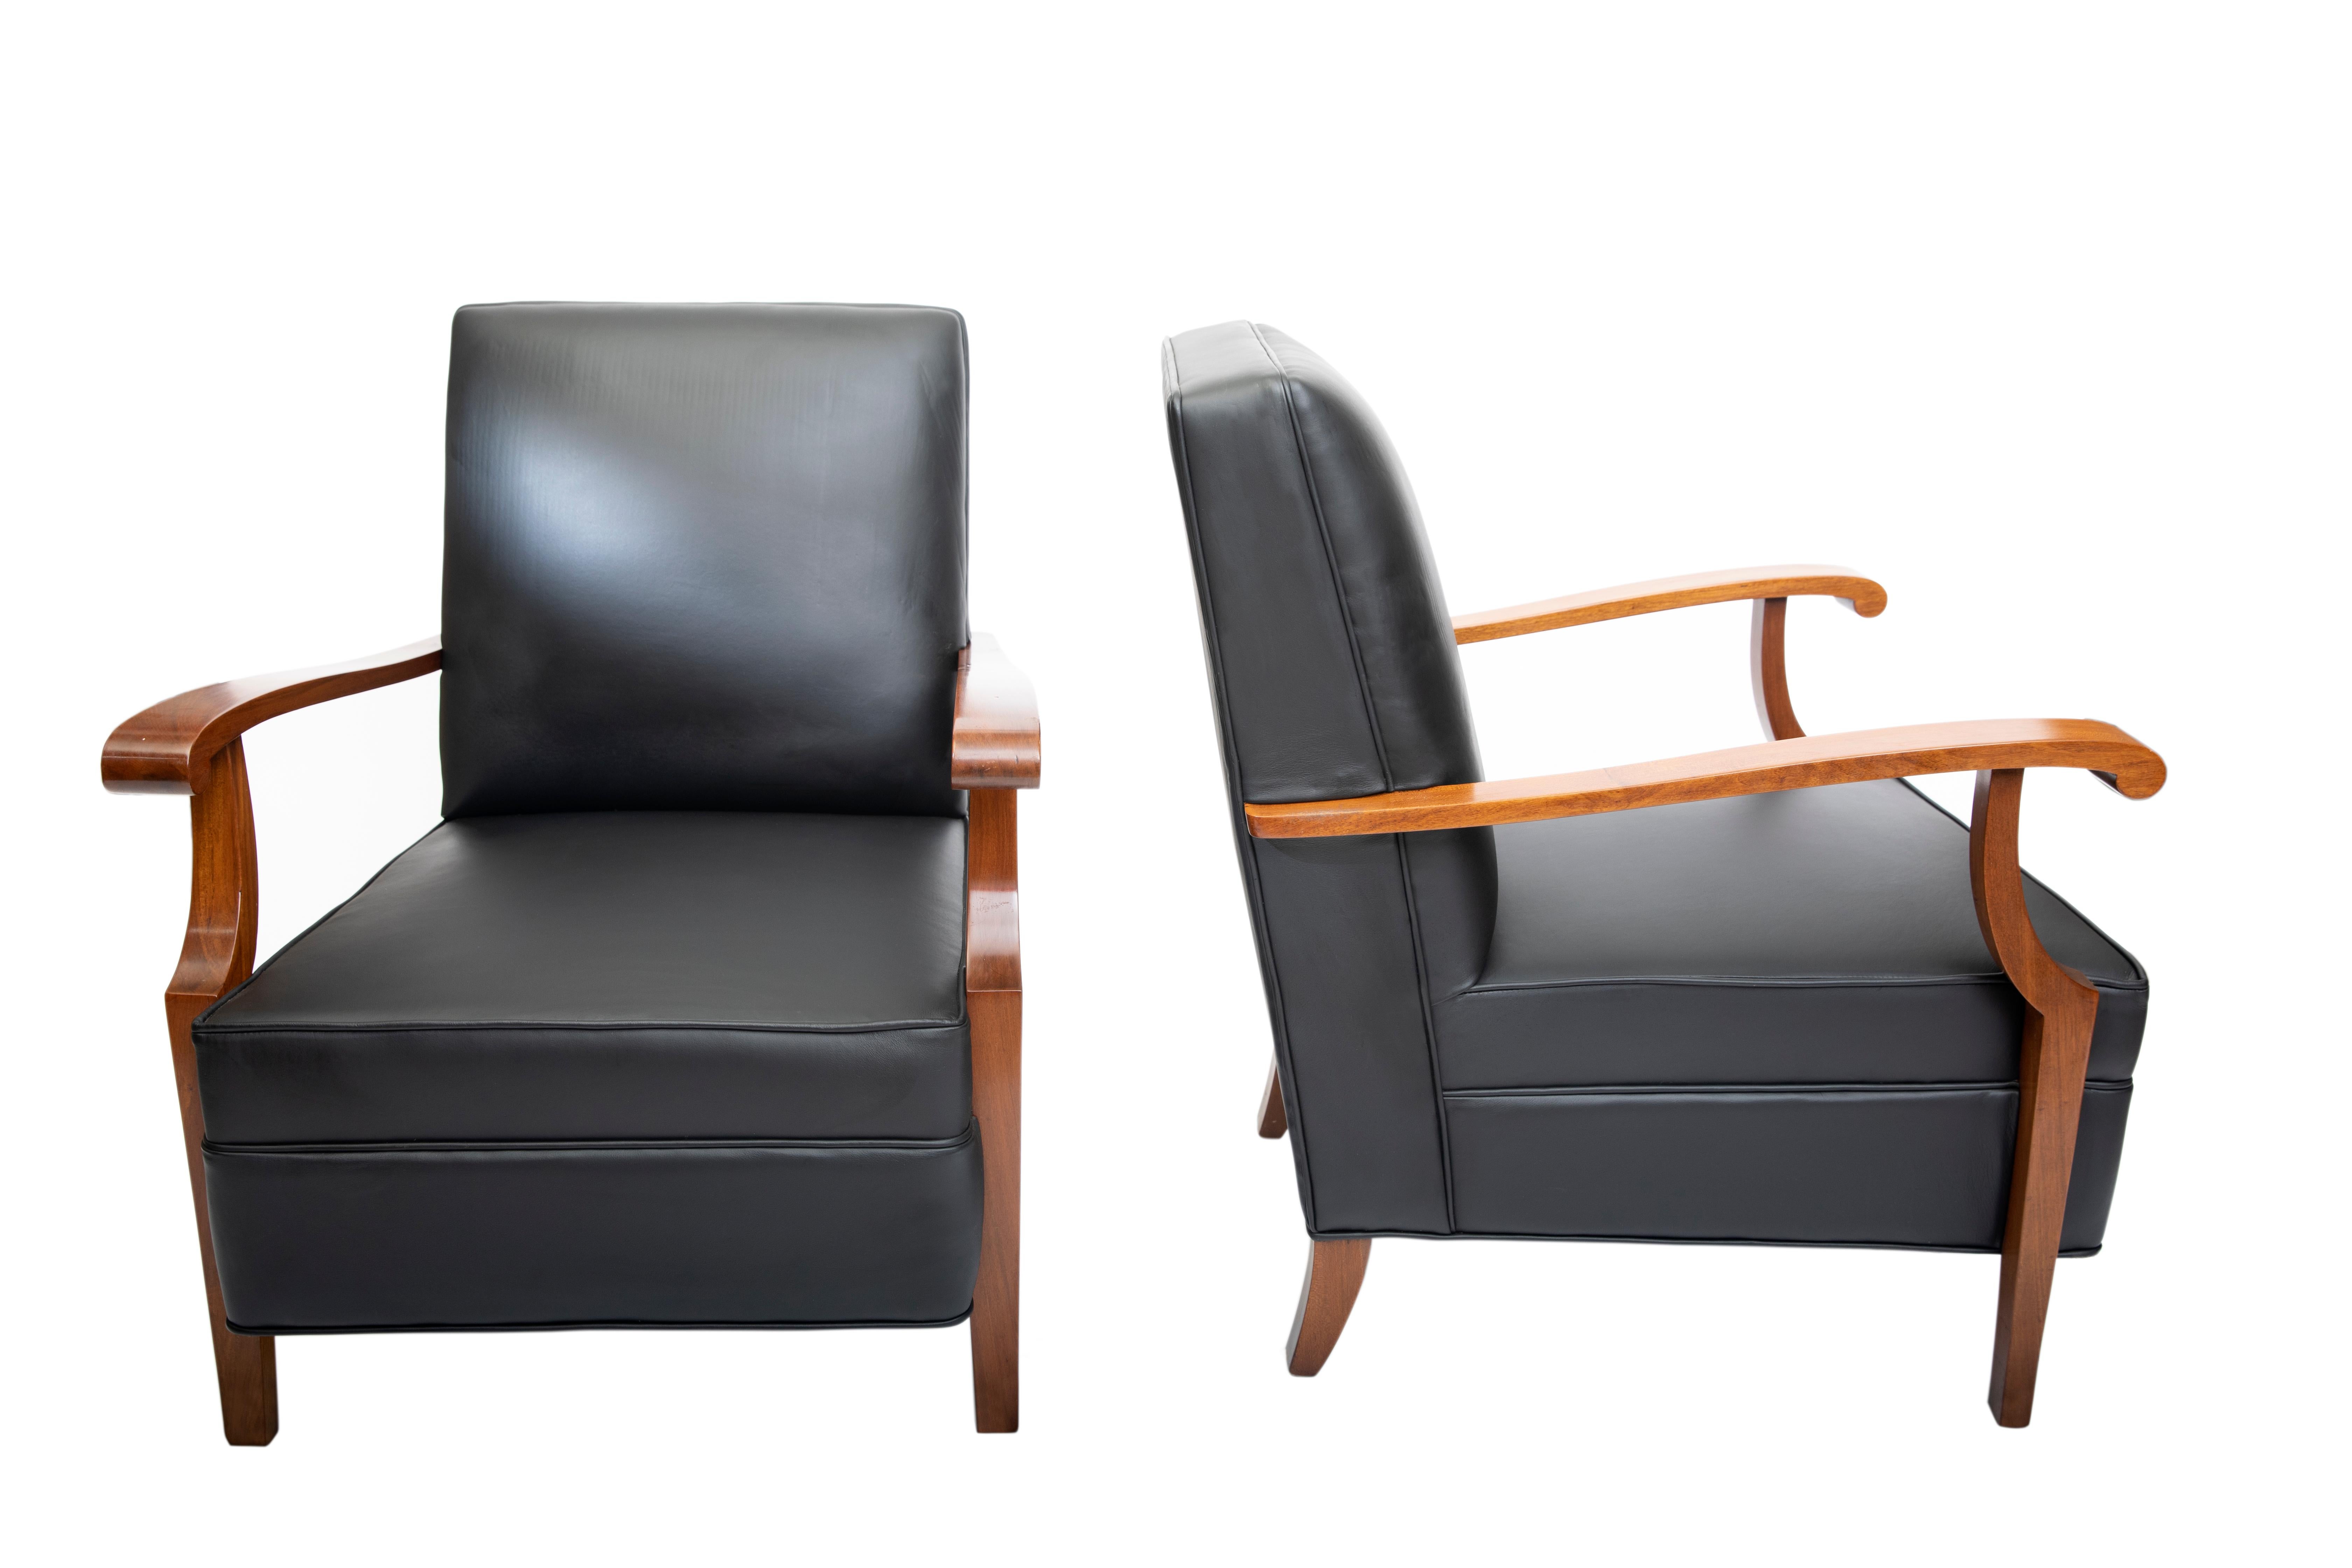 Pair of leather and wood armchairs by Comte. Argentina, Buenos Aires, circa 1940.